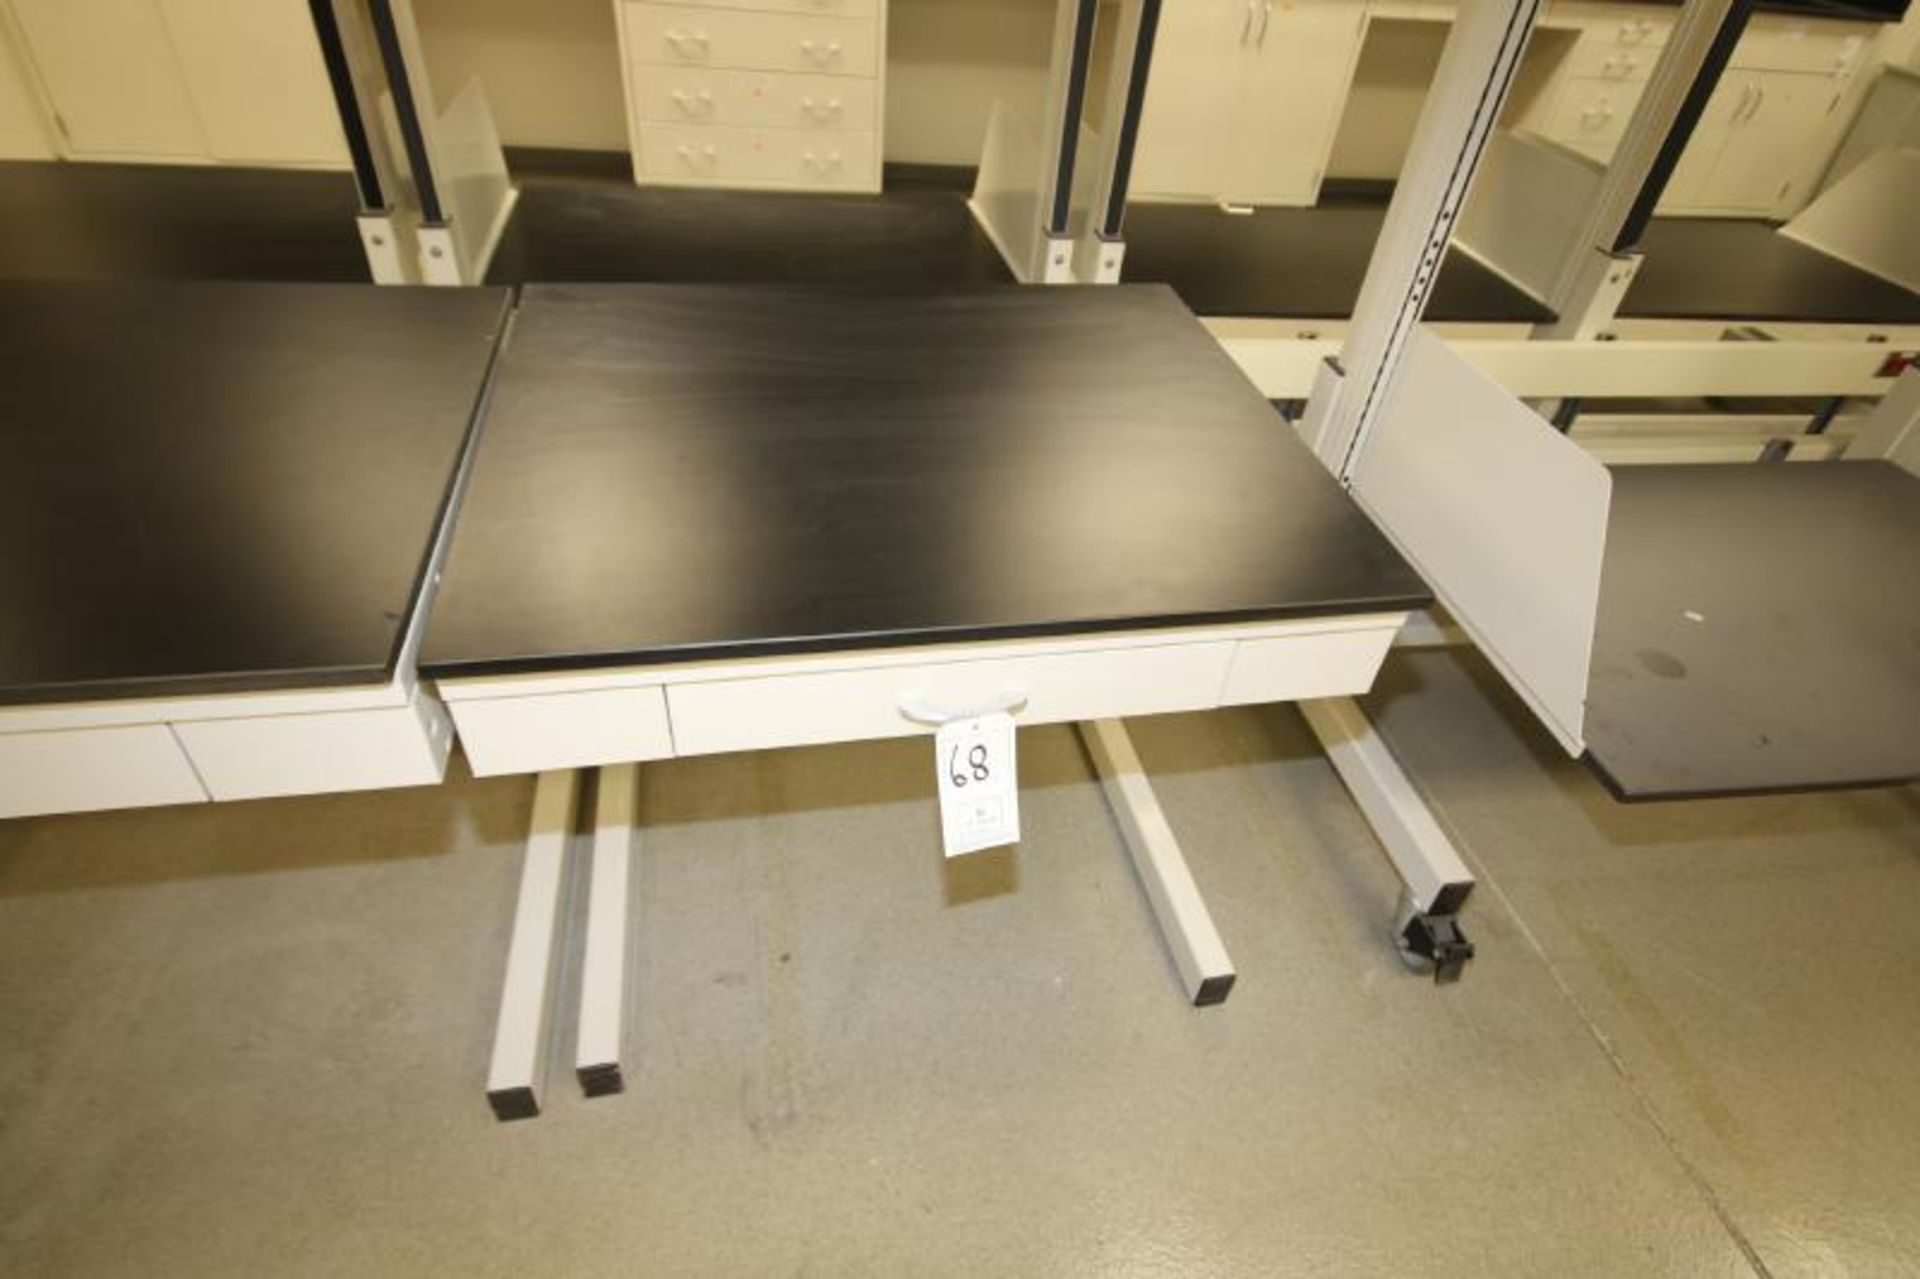 Hamilton Aprox. 36" L x 30" W Acid Resistant Top Lab Desk with Adjustable Height and Drawer (Located